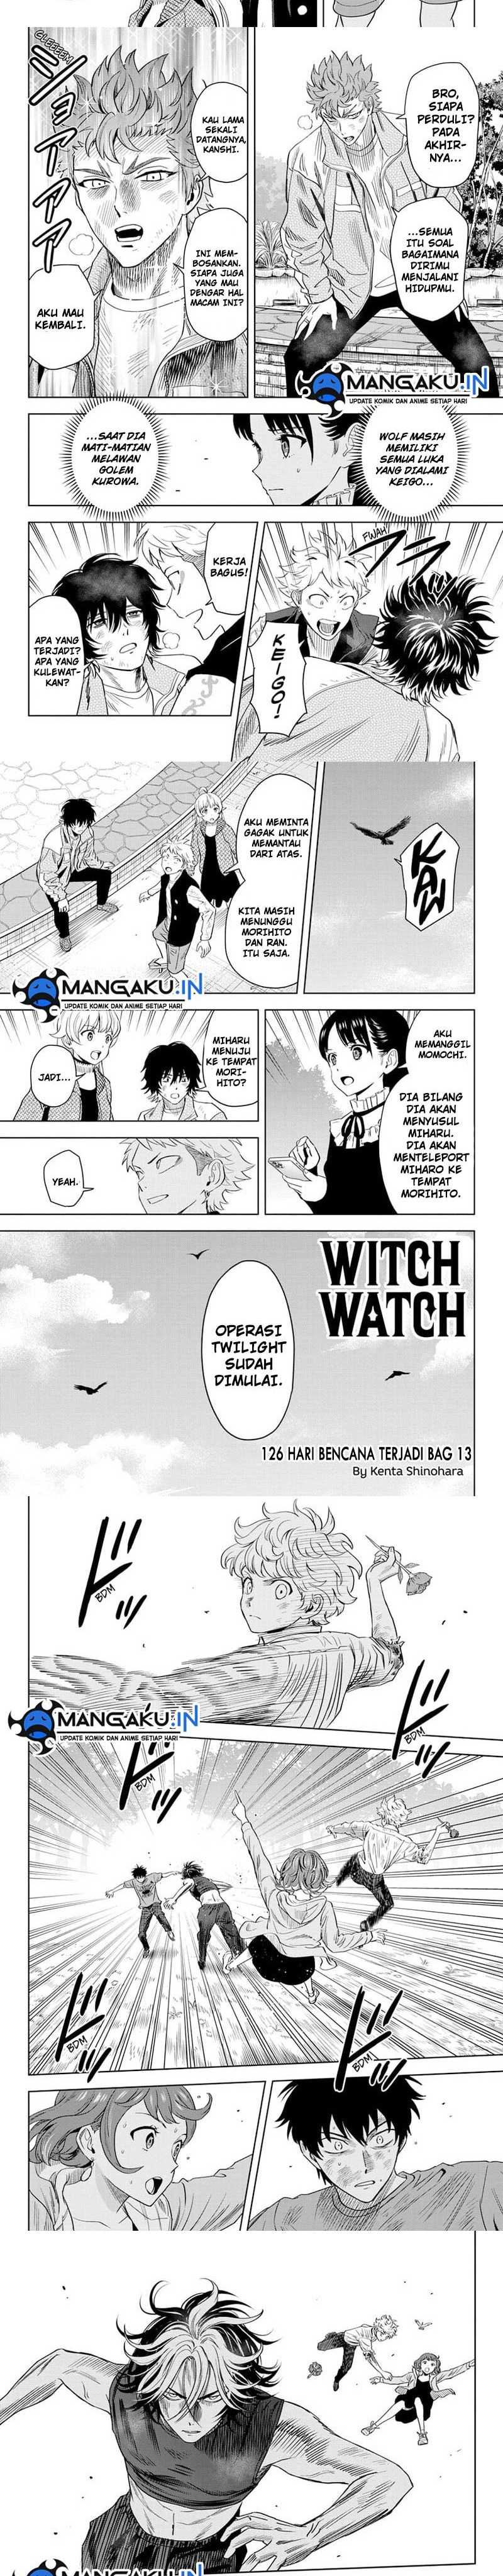 Witch Watch Chapter 126 2